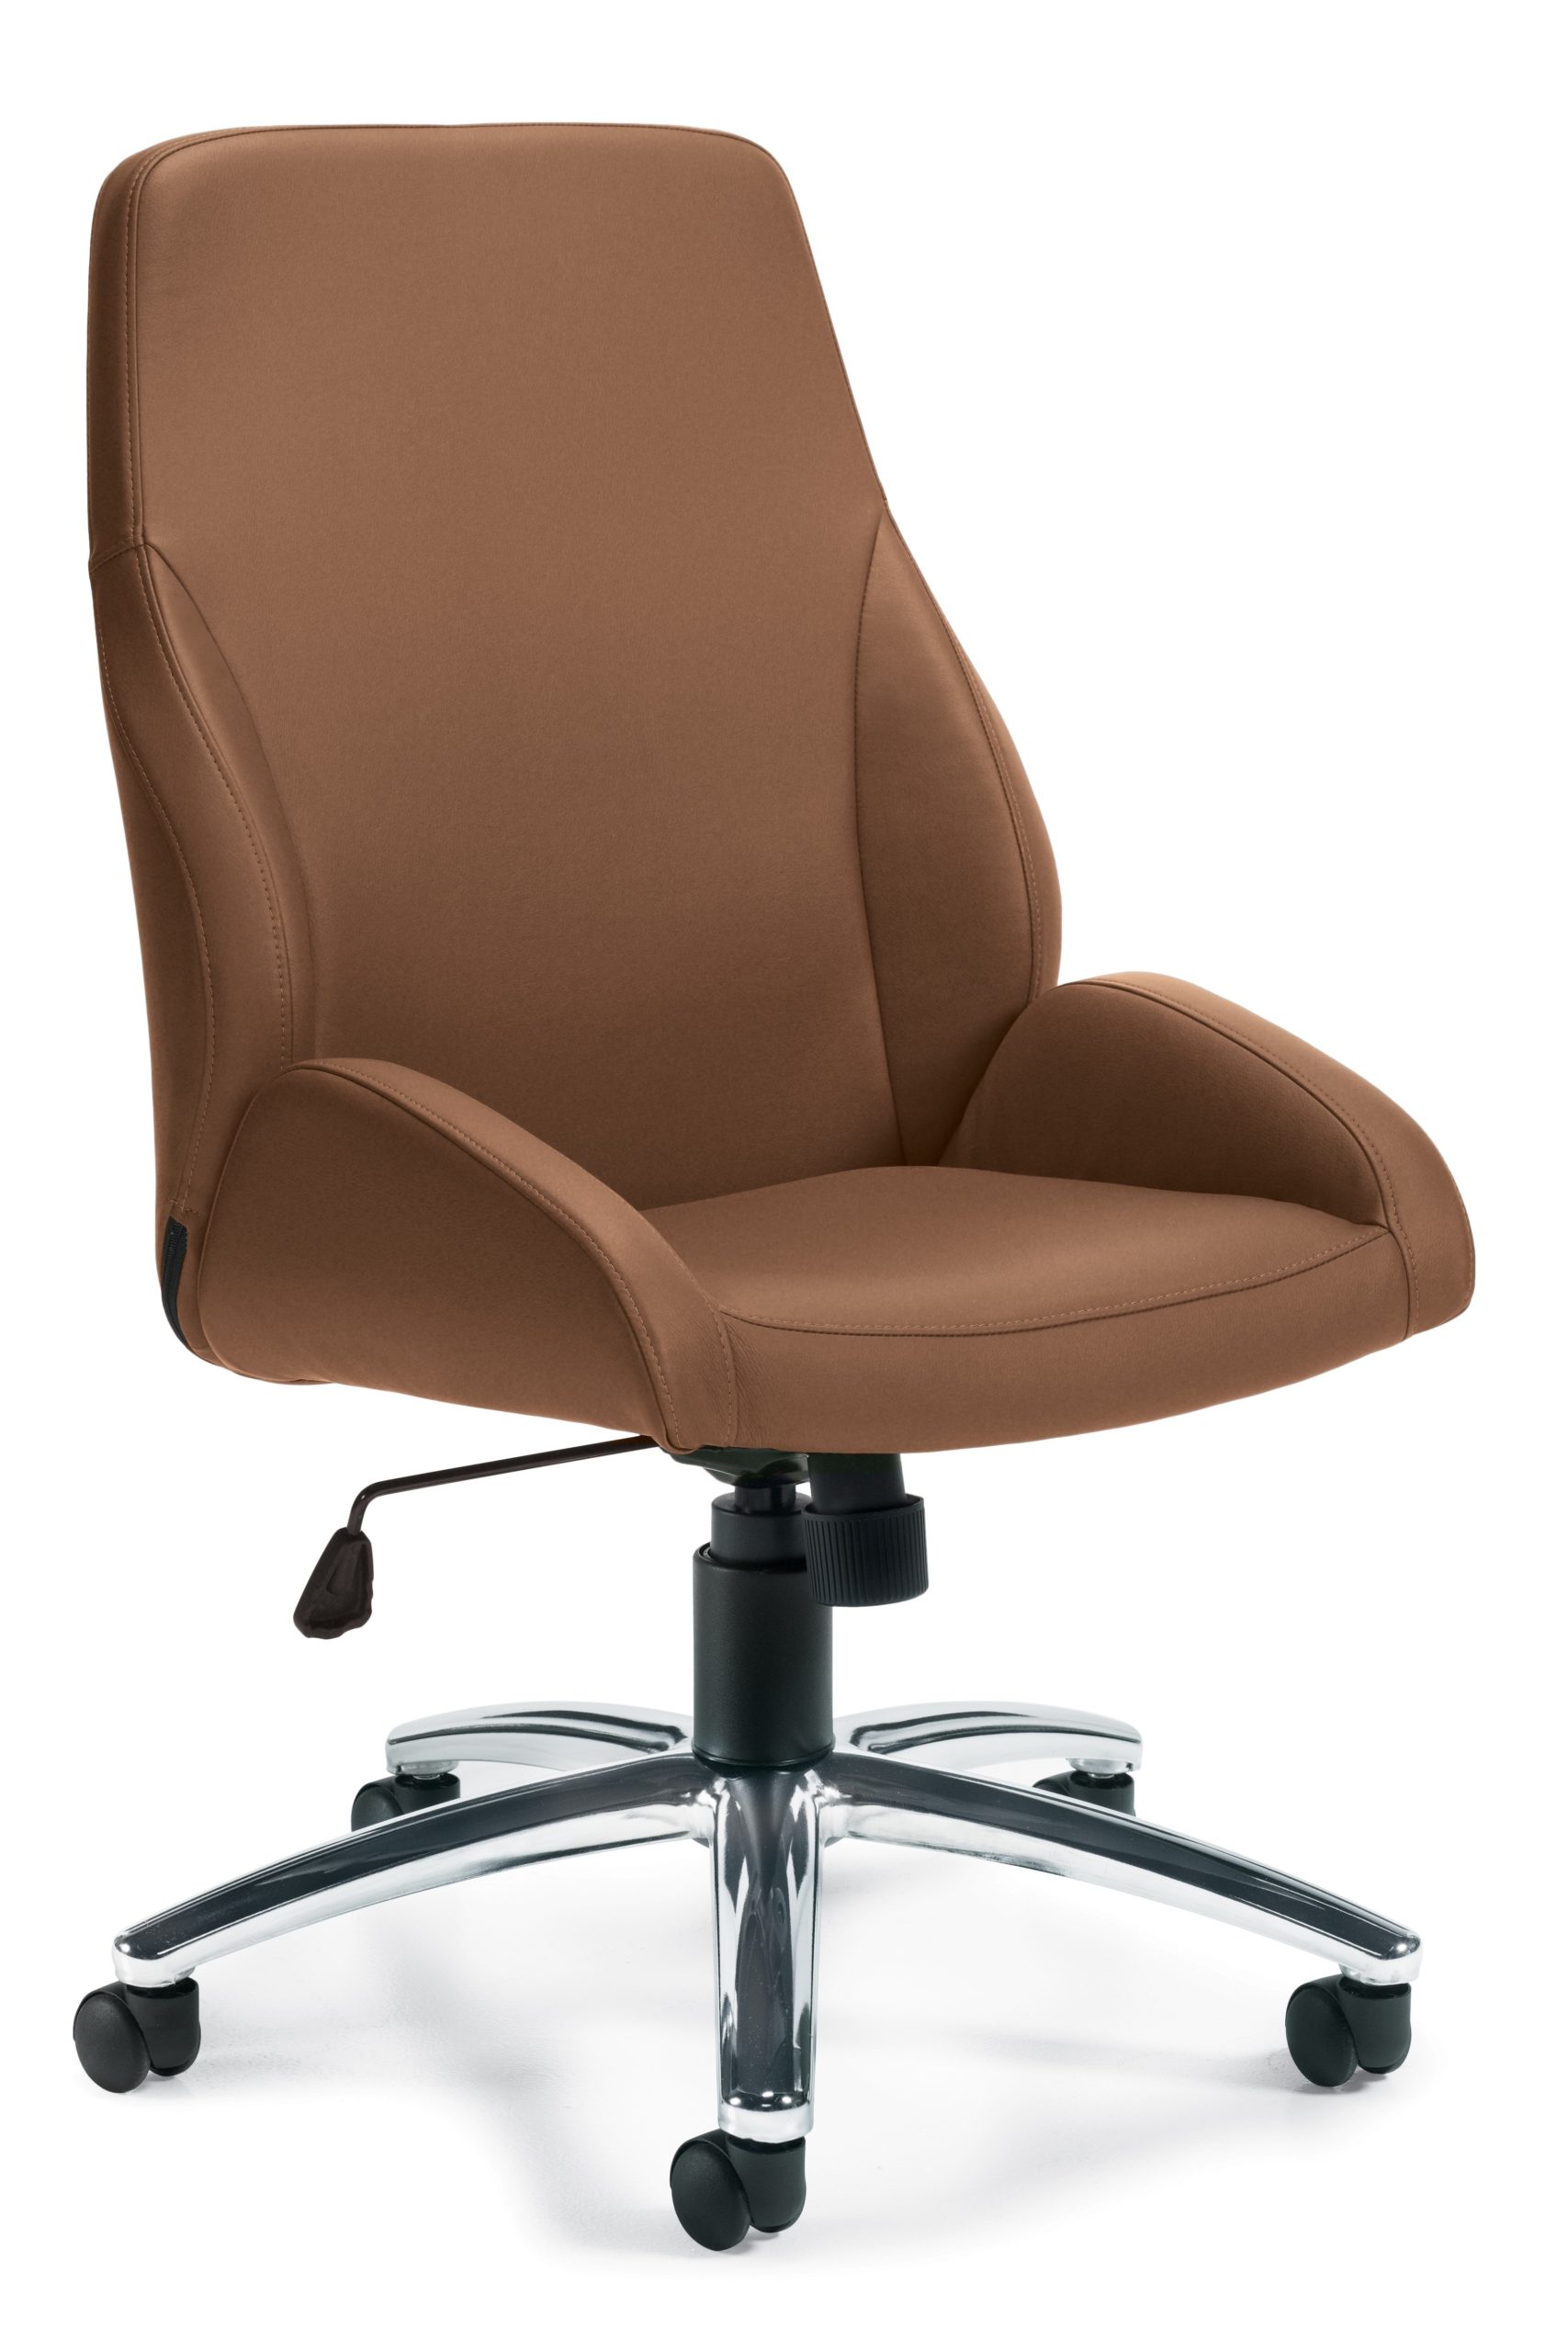 Armless midback swivel-tilt conference chair in medium tan Luxhide with tilt tension adjustment, wrap-around seat pan, tilt lock, and polished aluminum 5-star base.